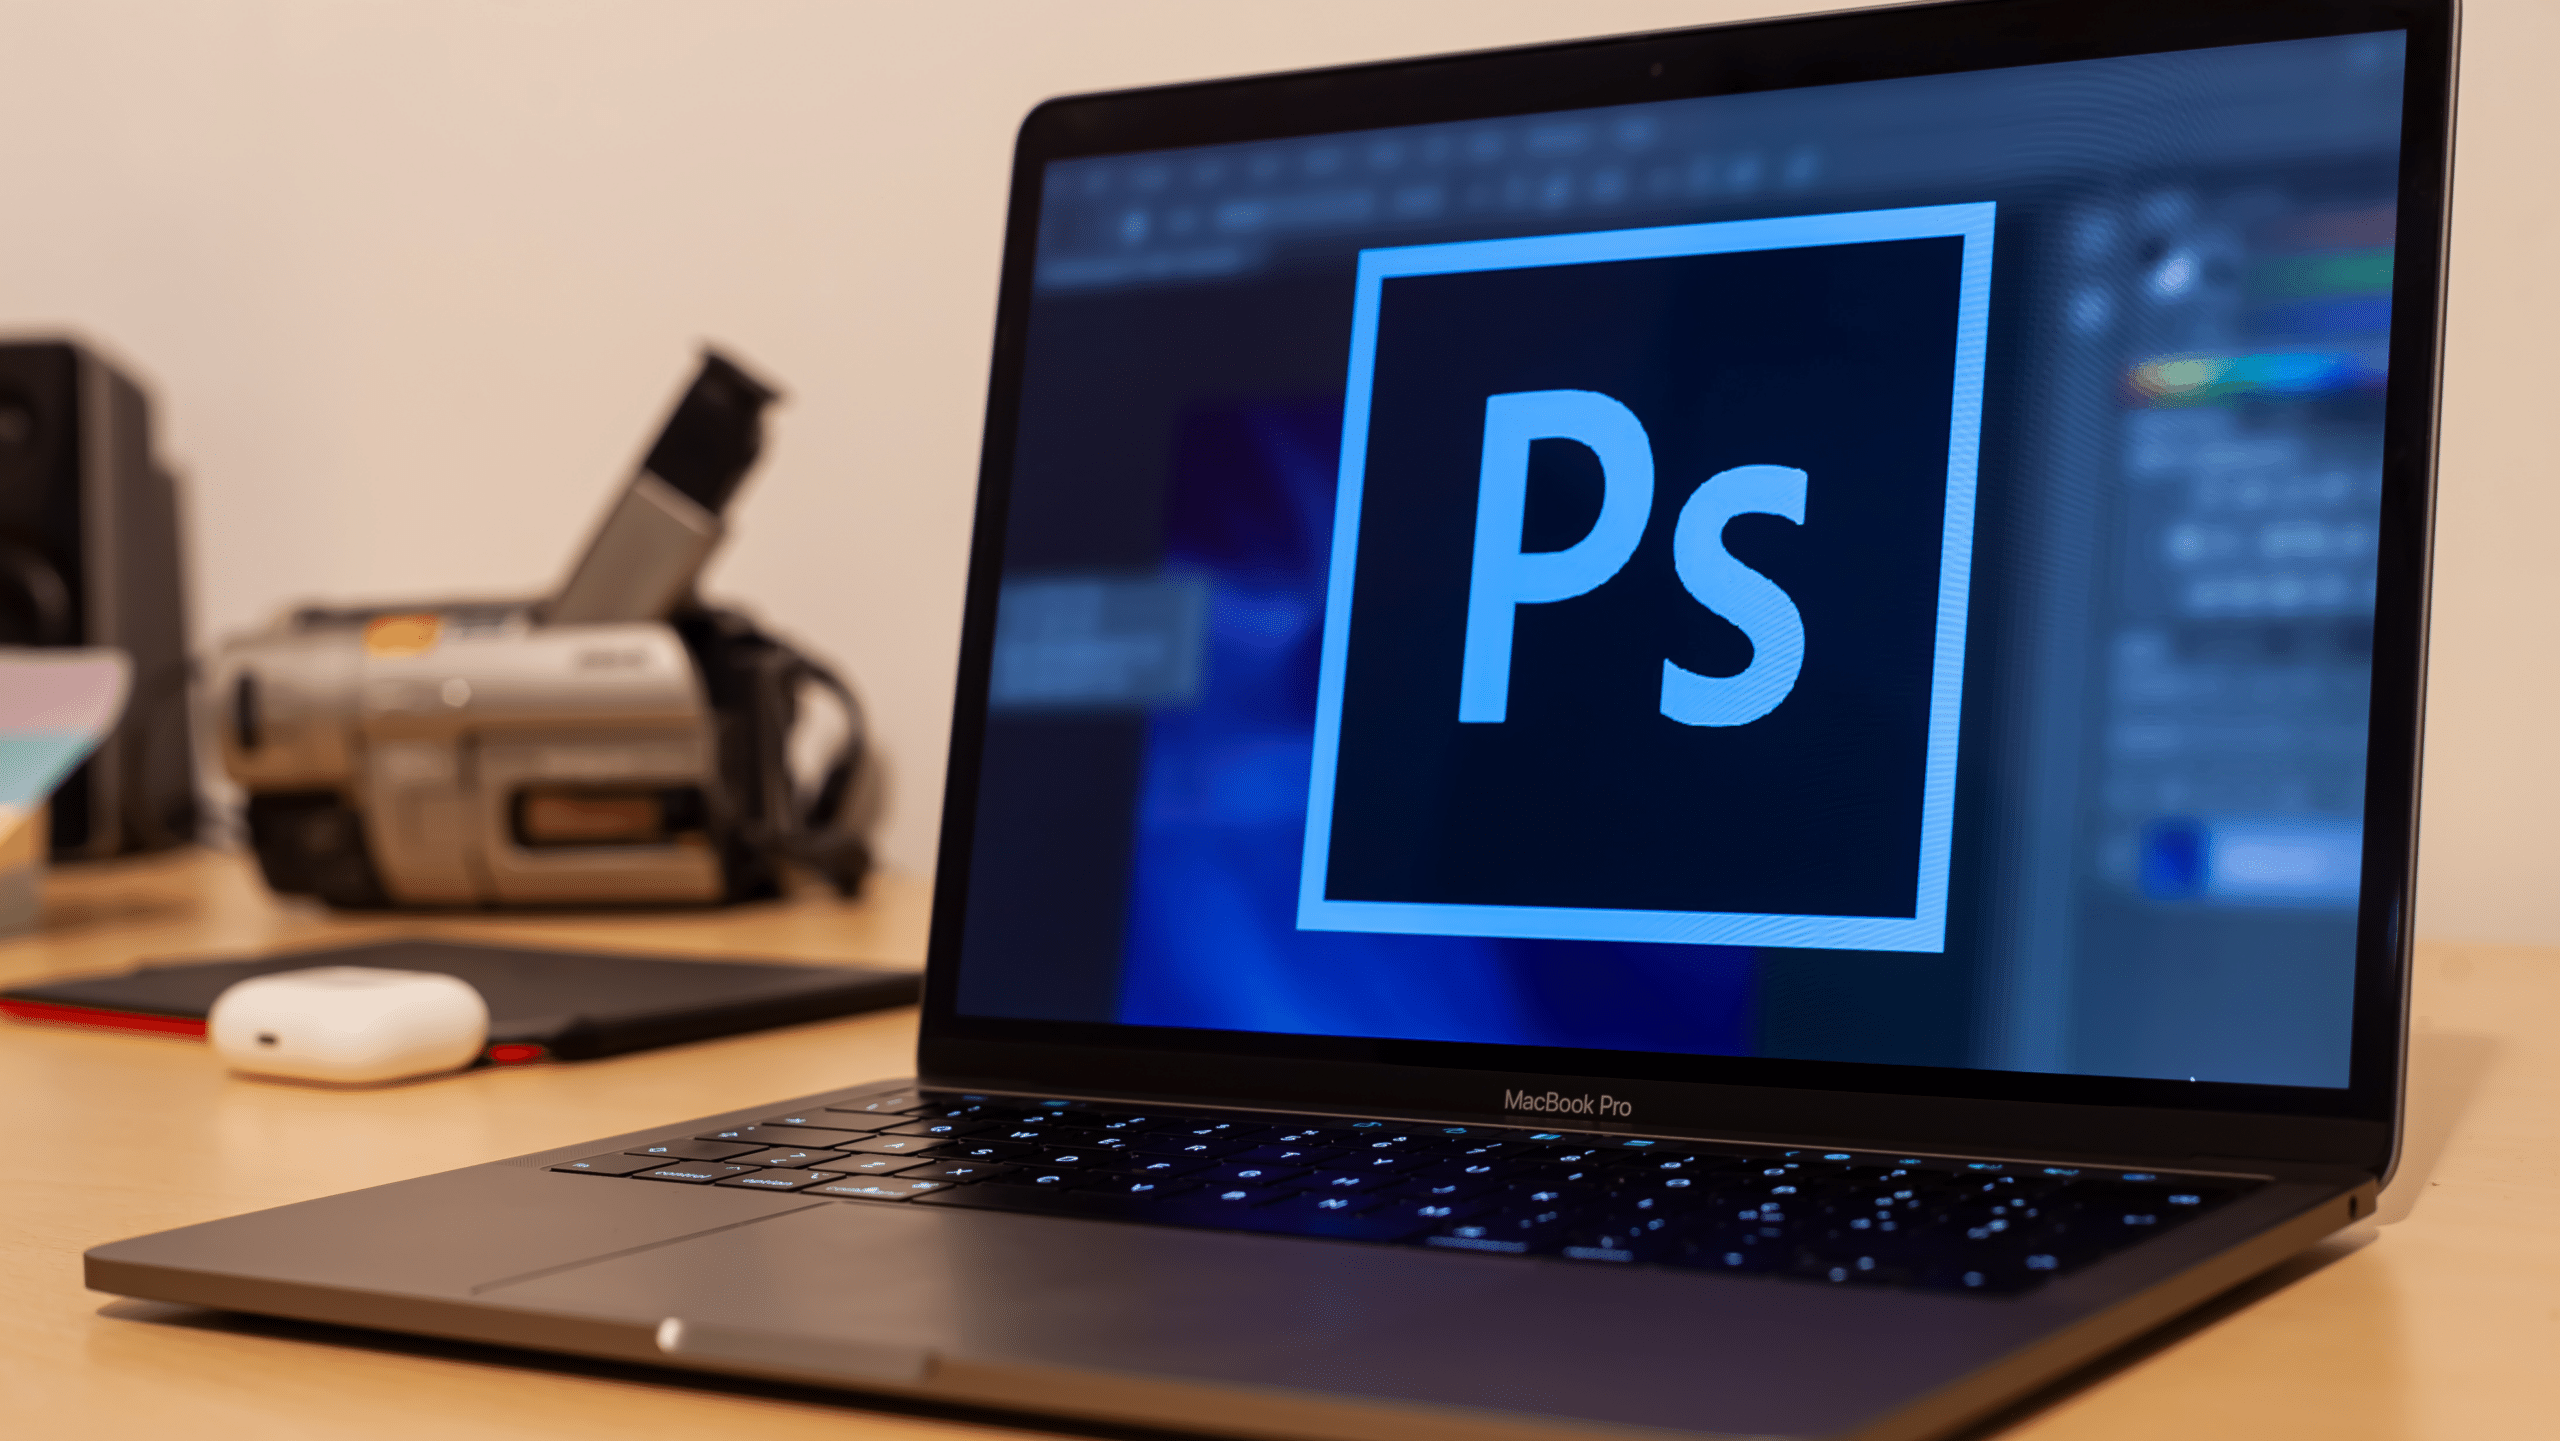 How to Get Photoshop on a Macbook